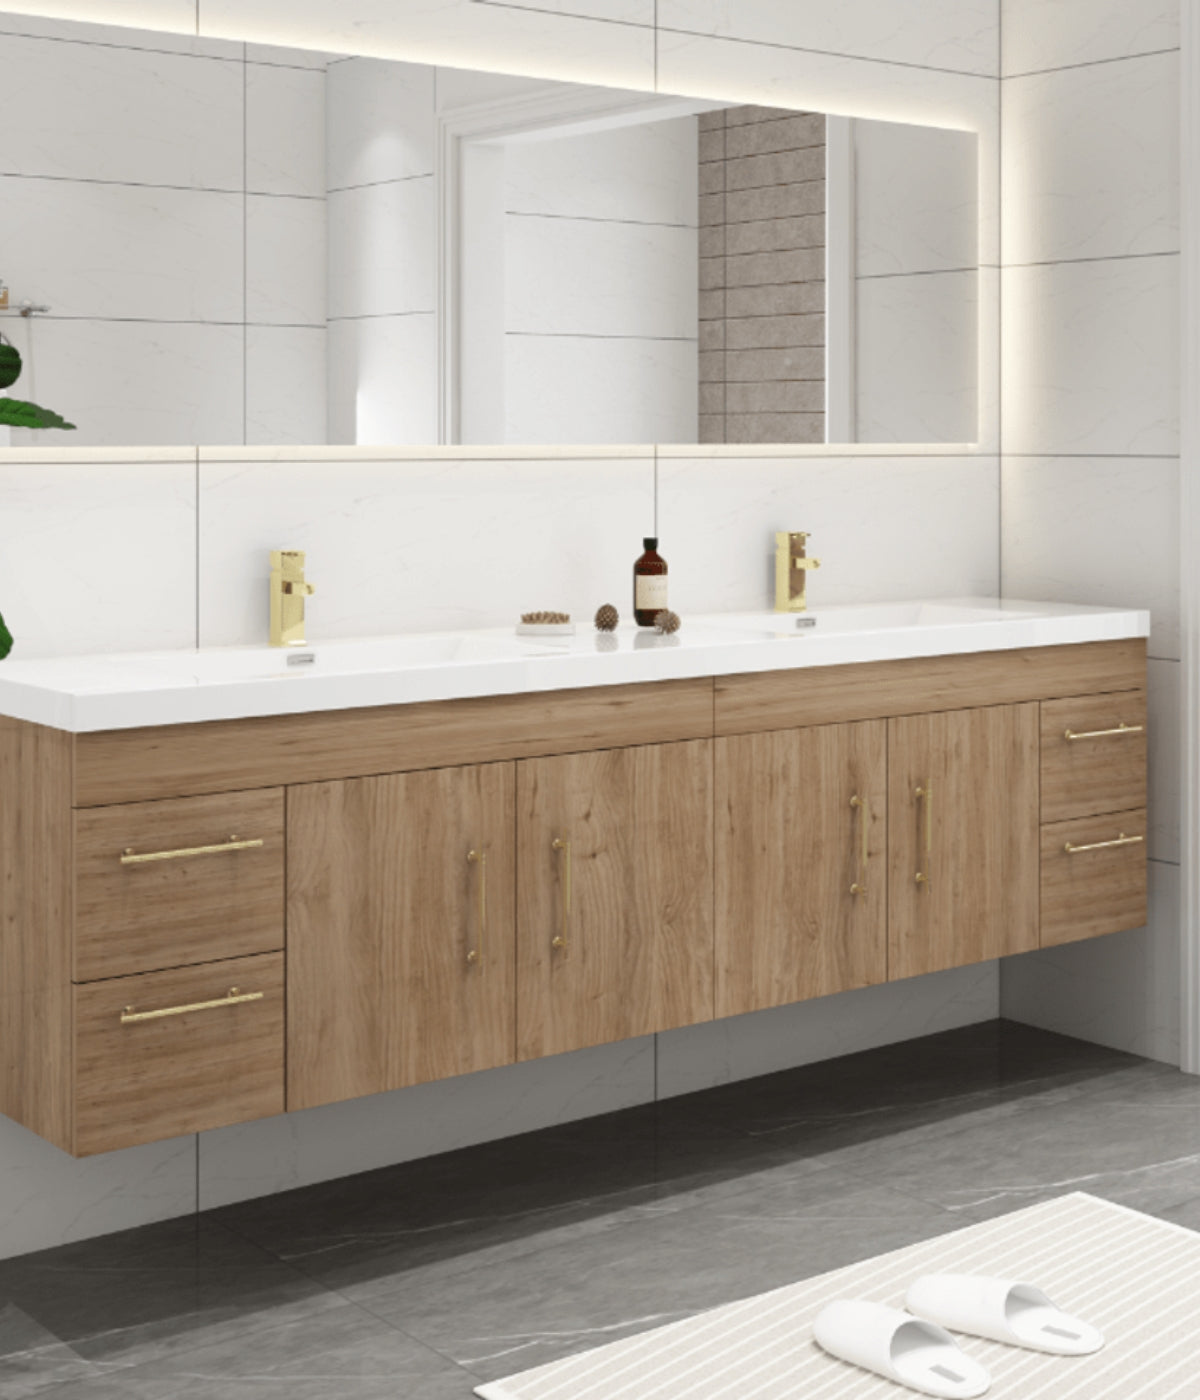 Luxury has never been so easy to purchase.  The Eliza 72 by moreno bath is the most cost effective luxury bathroom wood vanity on the market.